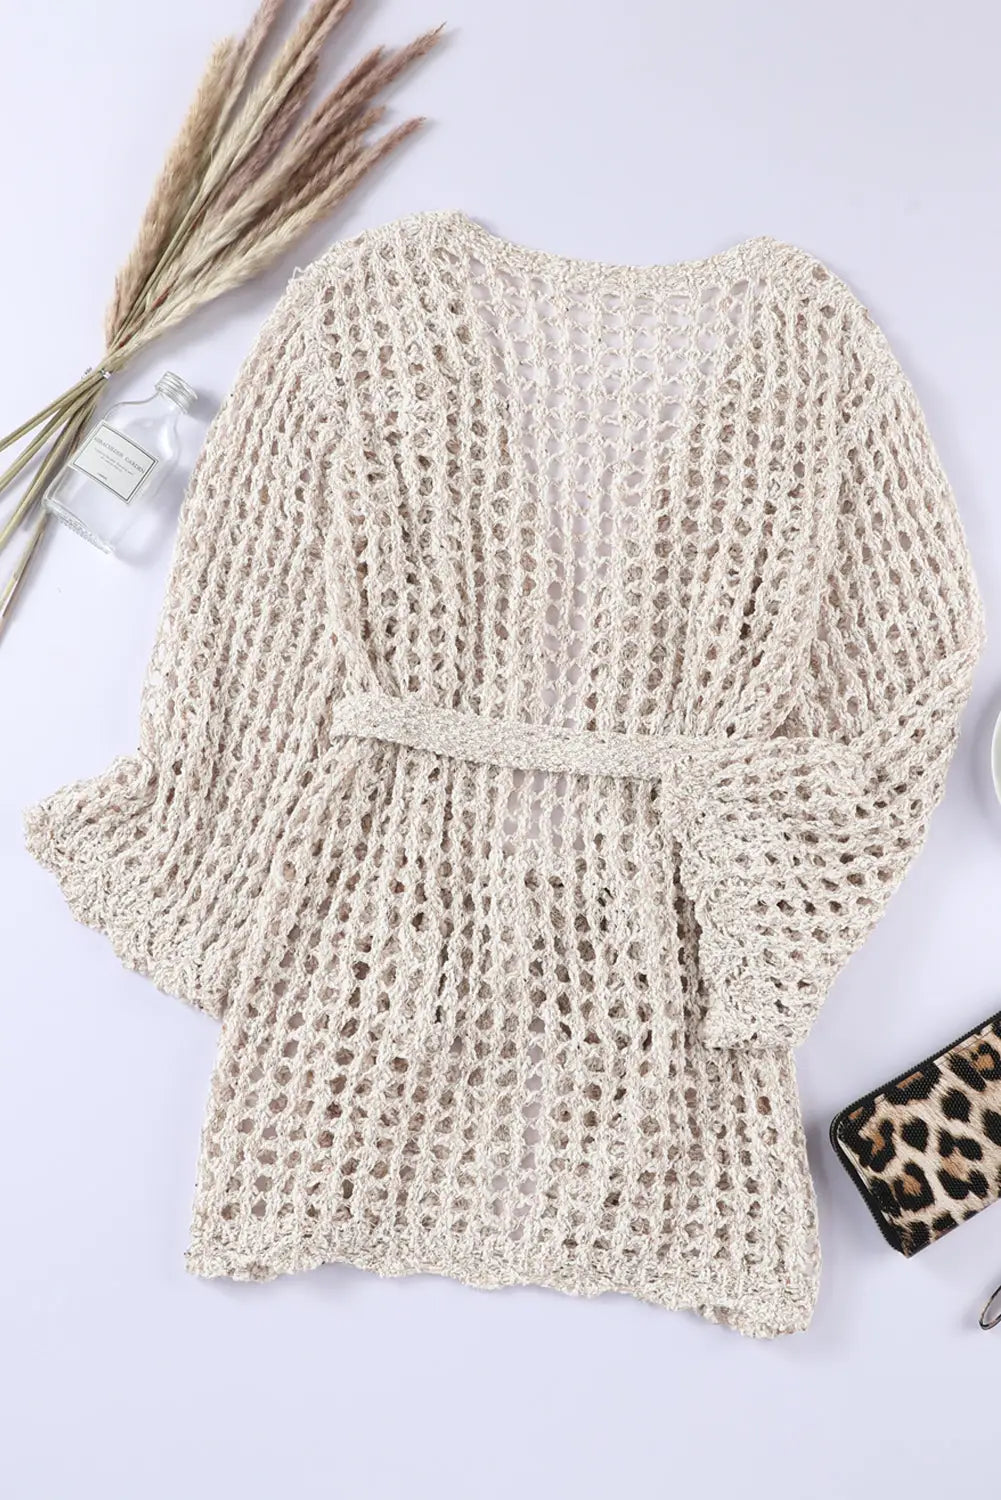 Apricot knit crochet open front beach cover up with tie -